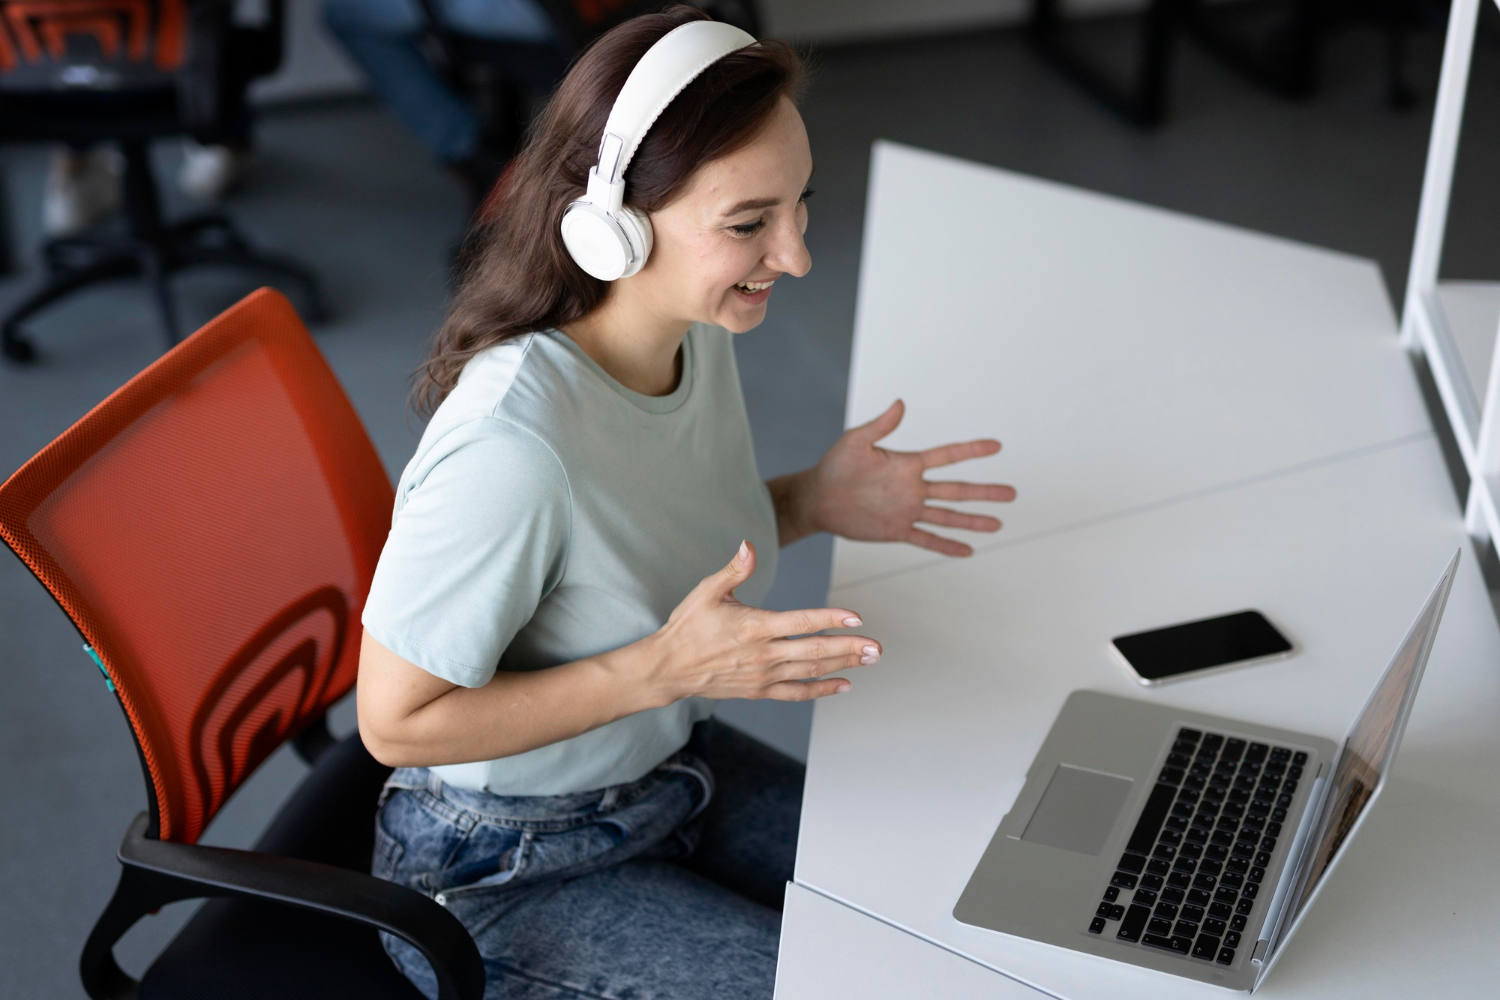 Women at work wearing headphones in front of a laptop